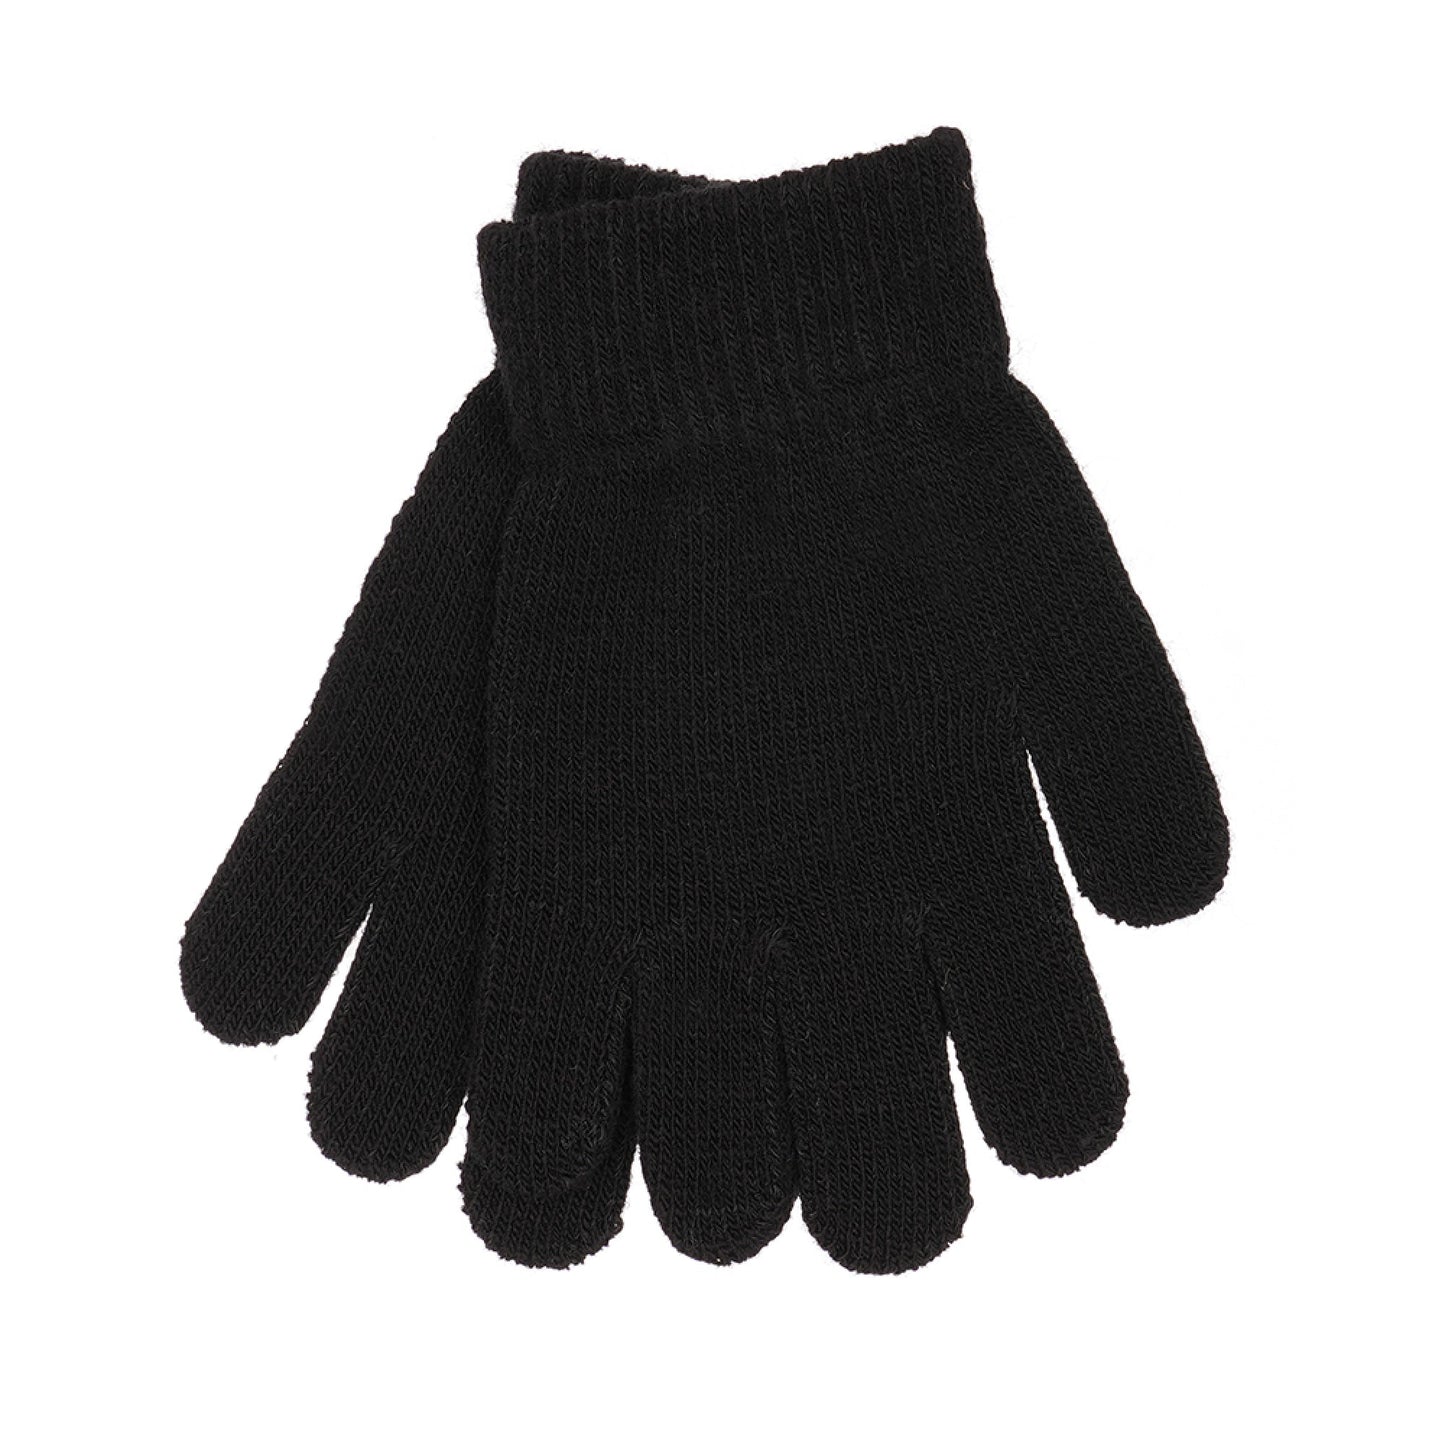 6 Pairs Boys Thermal Knitted Stretch Gloves - Multi or Black